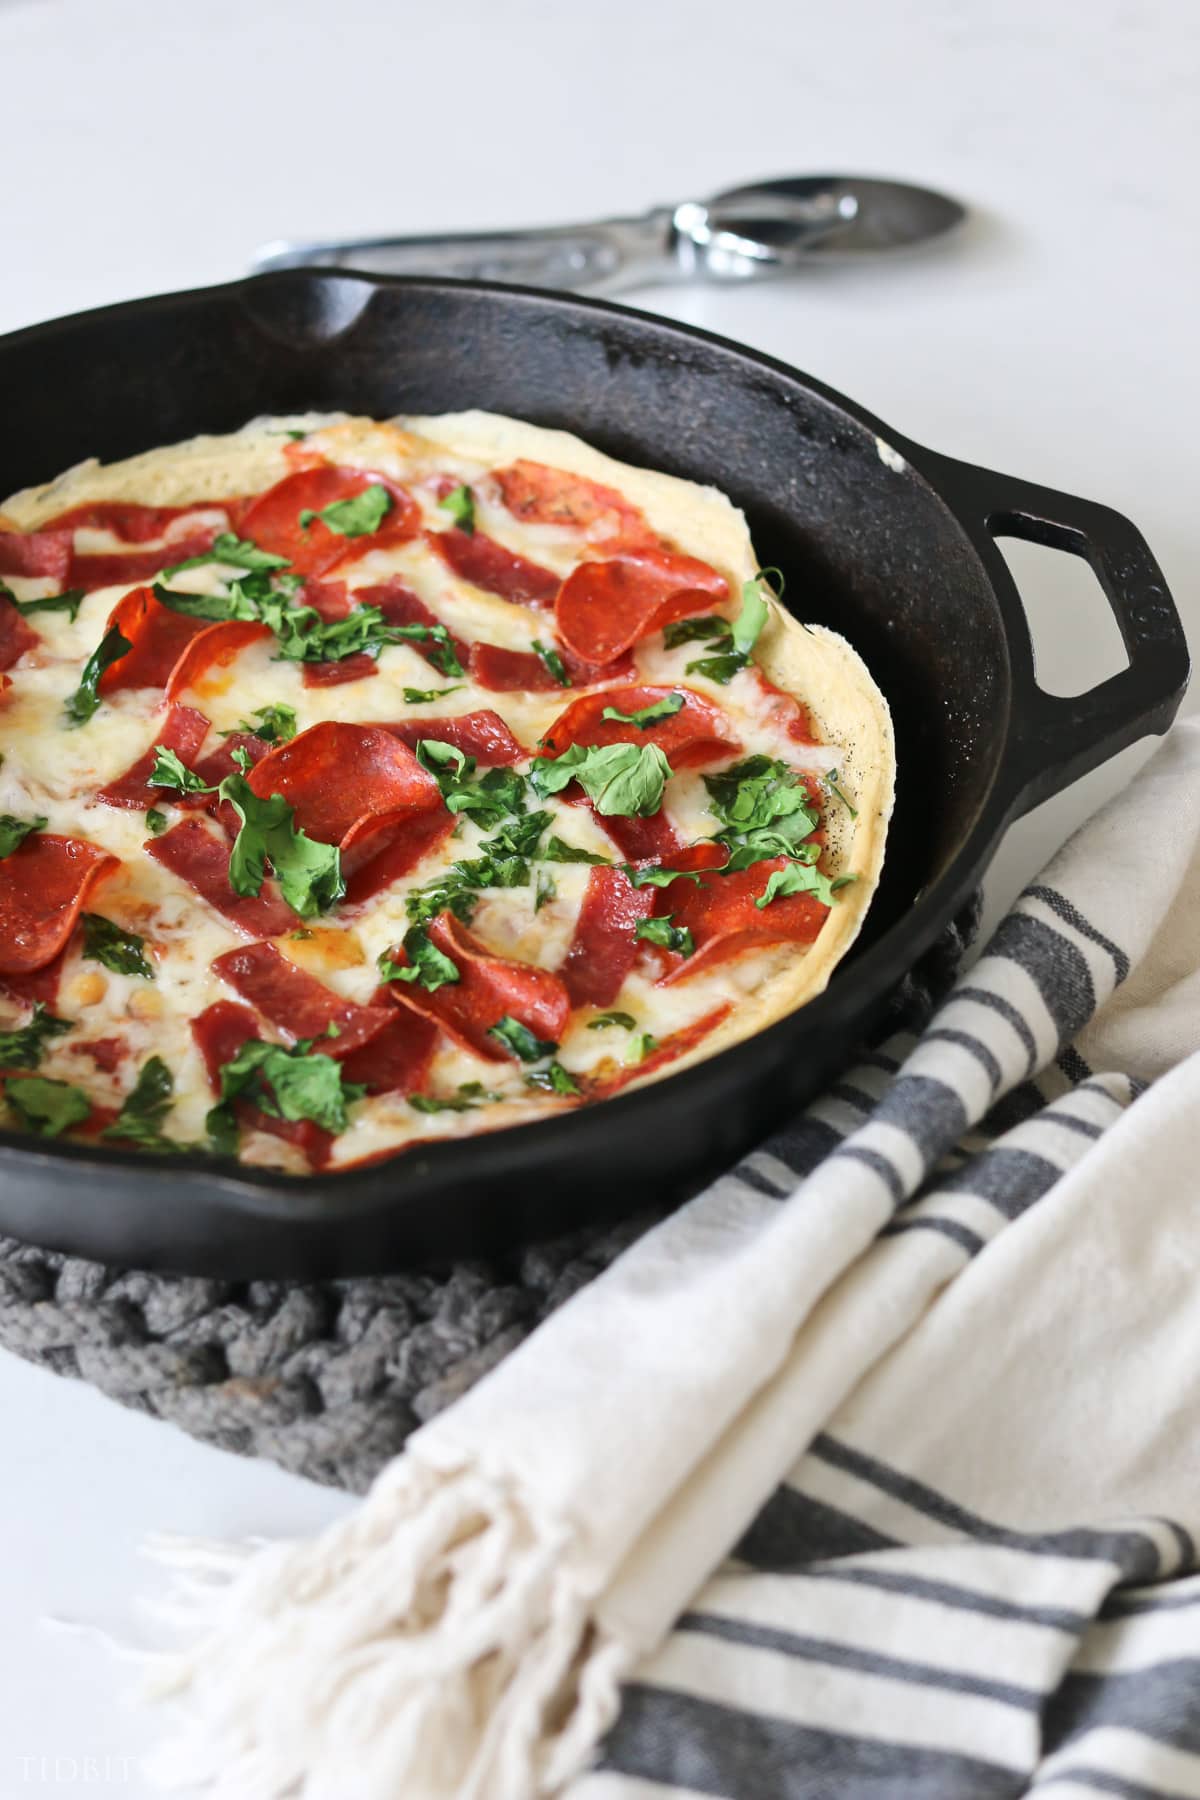 Sour dough pizza with pepperoni and herbs in a cast iron pan